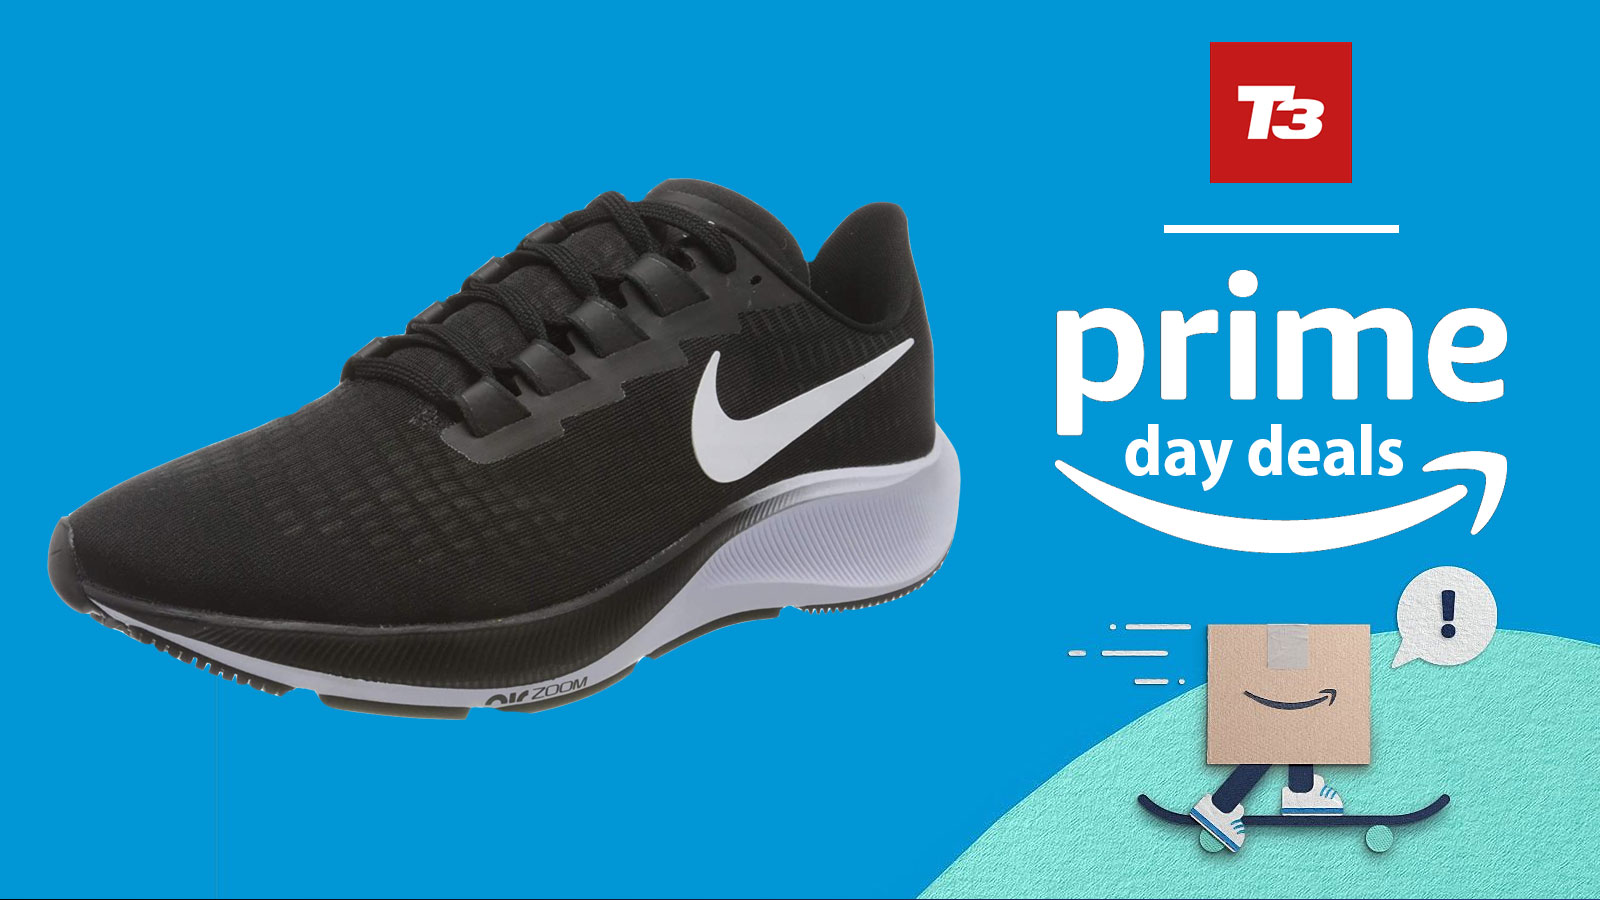 3 best Amazon Prime Day trainers deals 